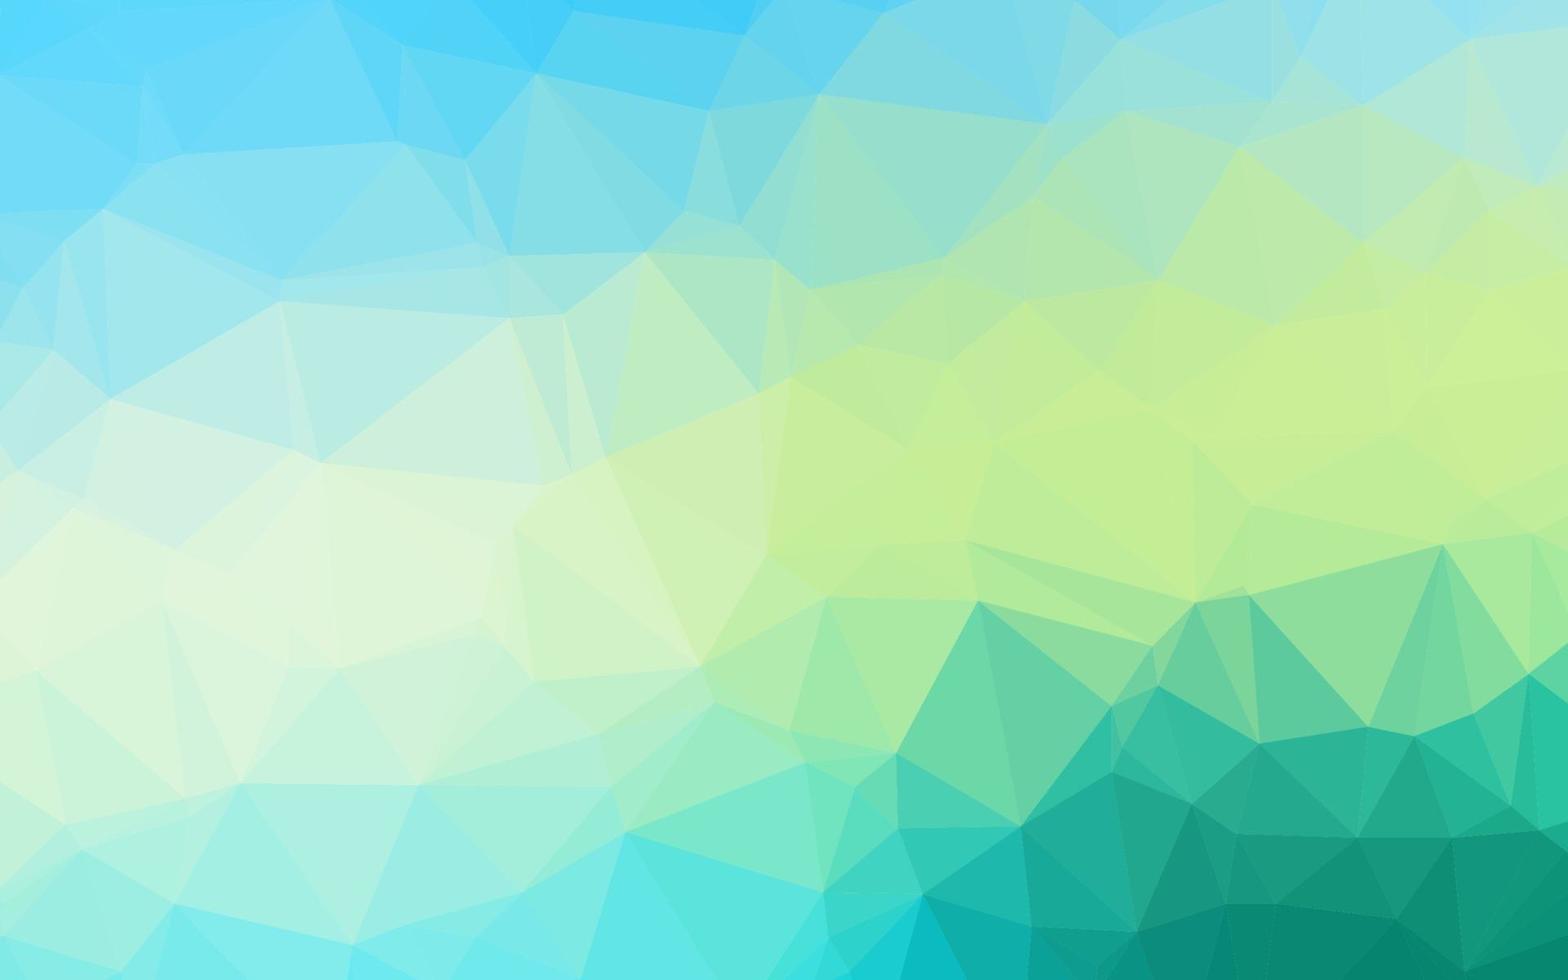 Light Blue, Yellow vector abstract polygonal layout.